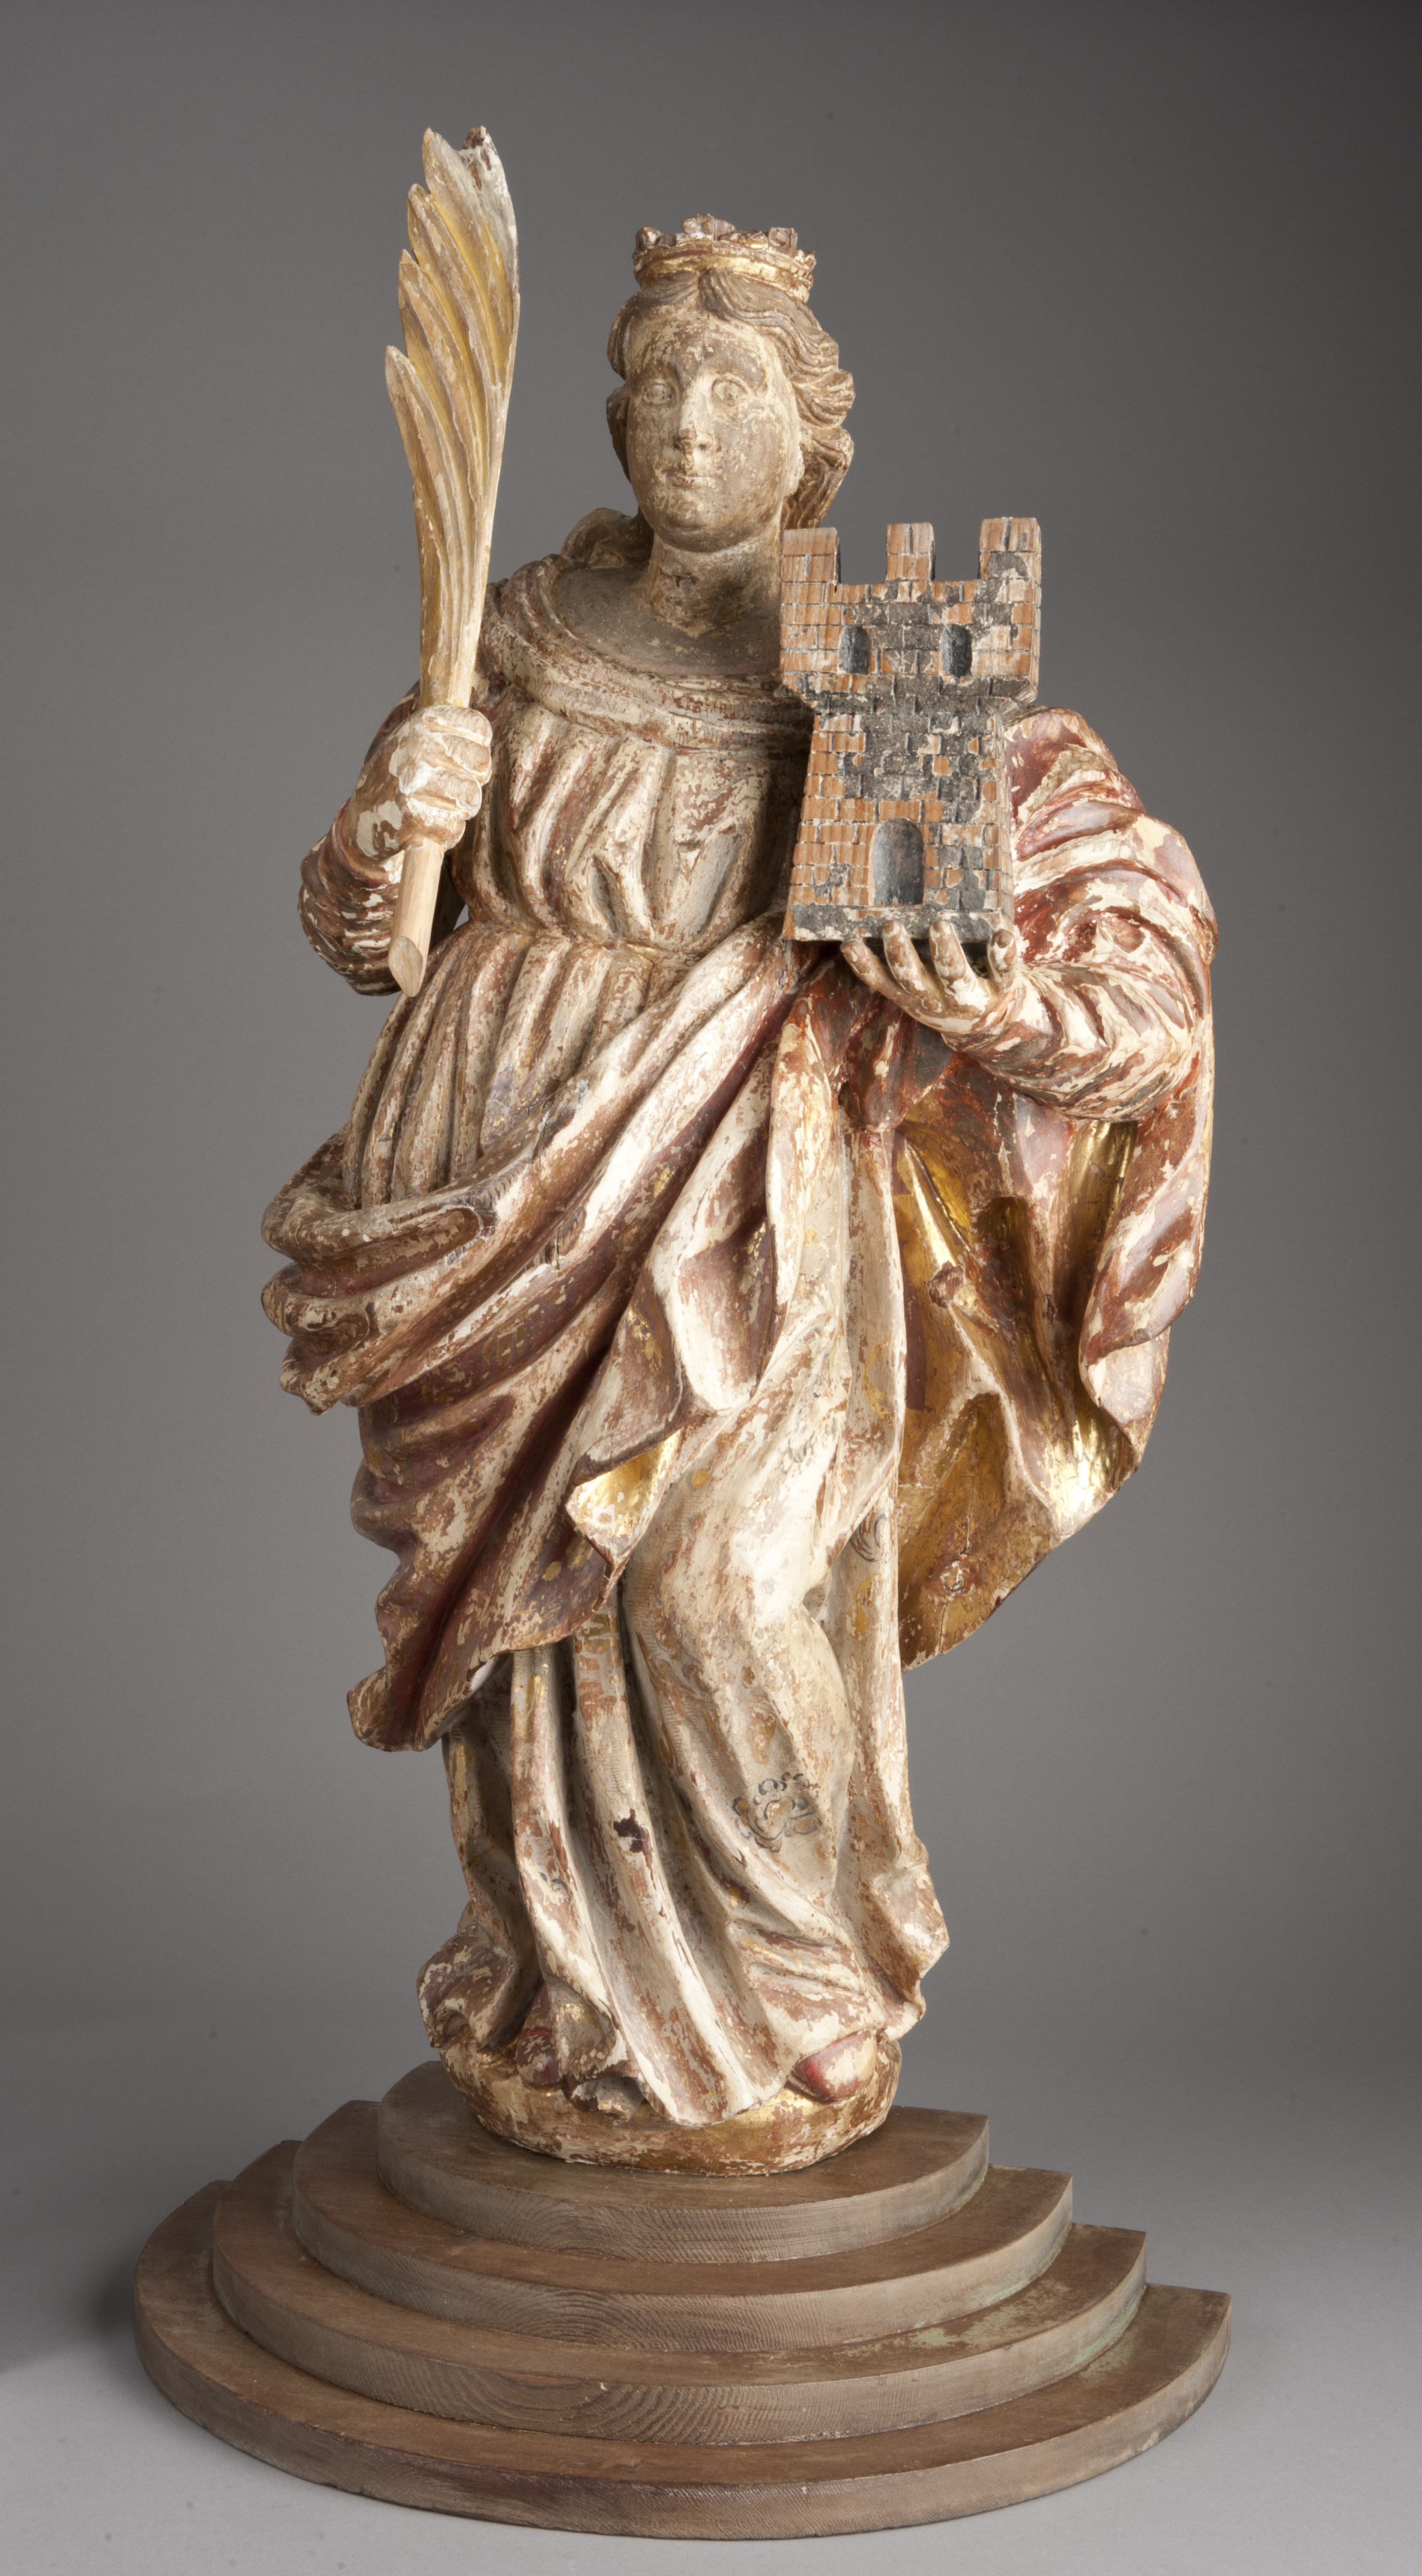 Wooden statue of female saint, St. Barbara, with palm frond and tower